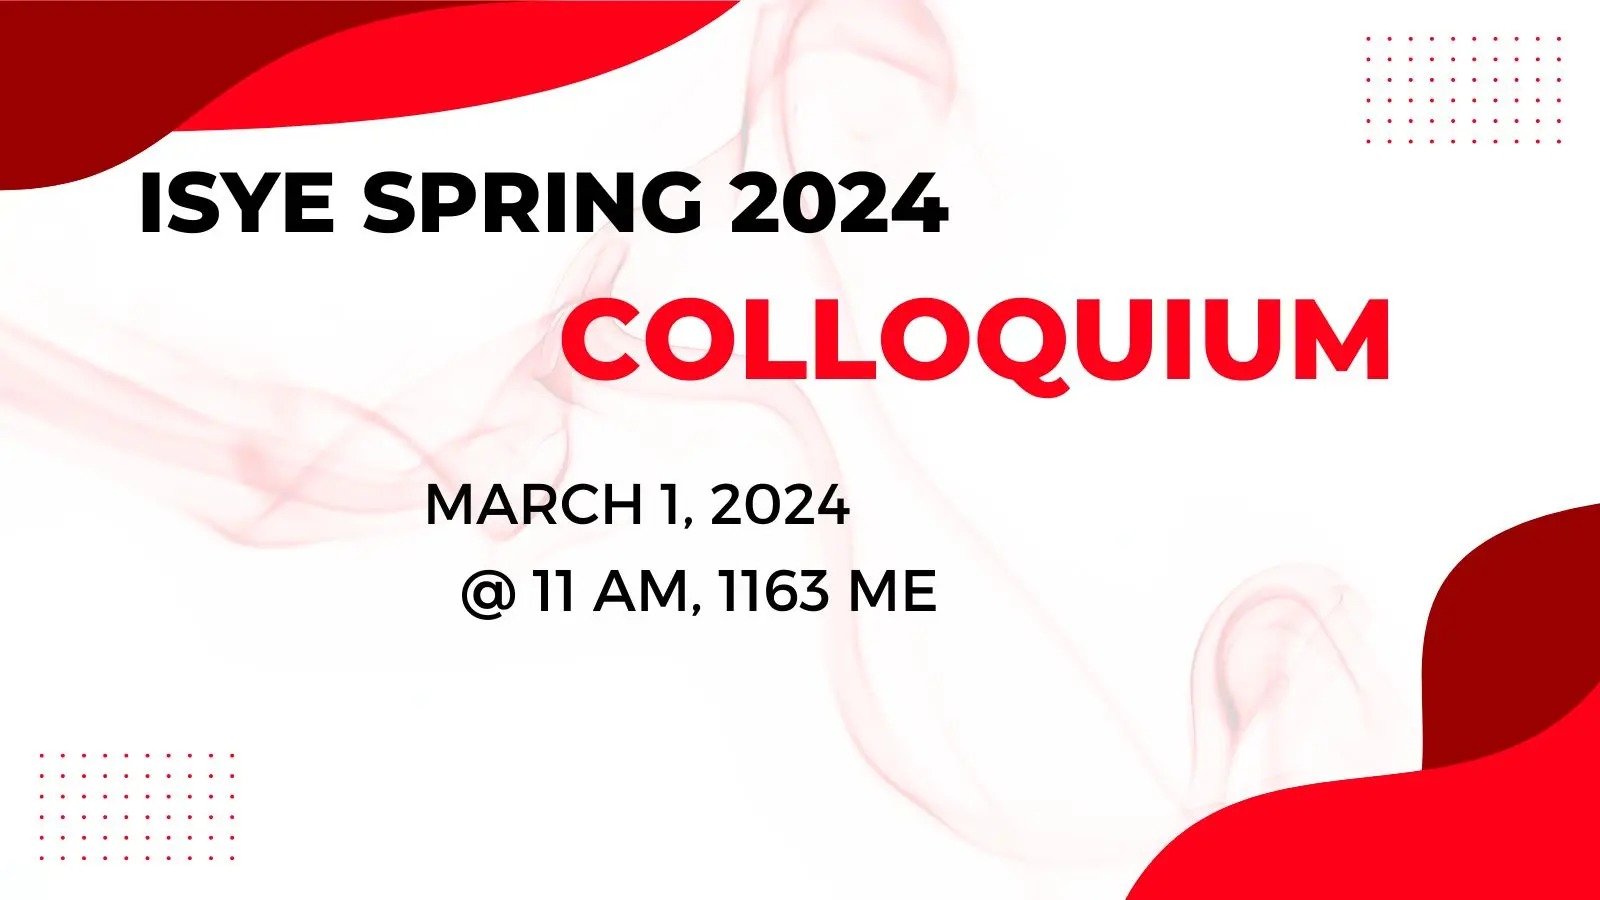 ISyE Spring Colloquium March 1 at 11 AM in 1163 ME